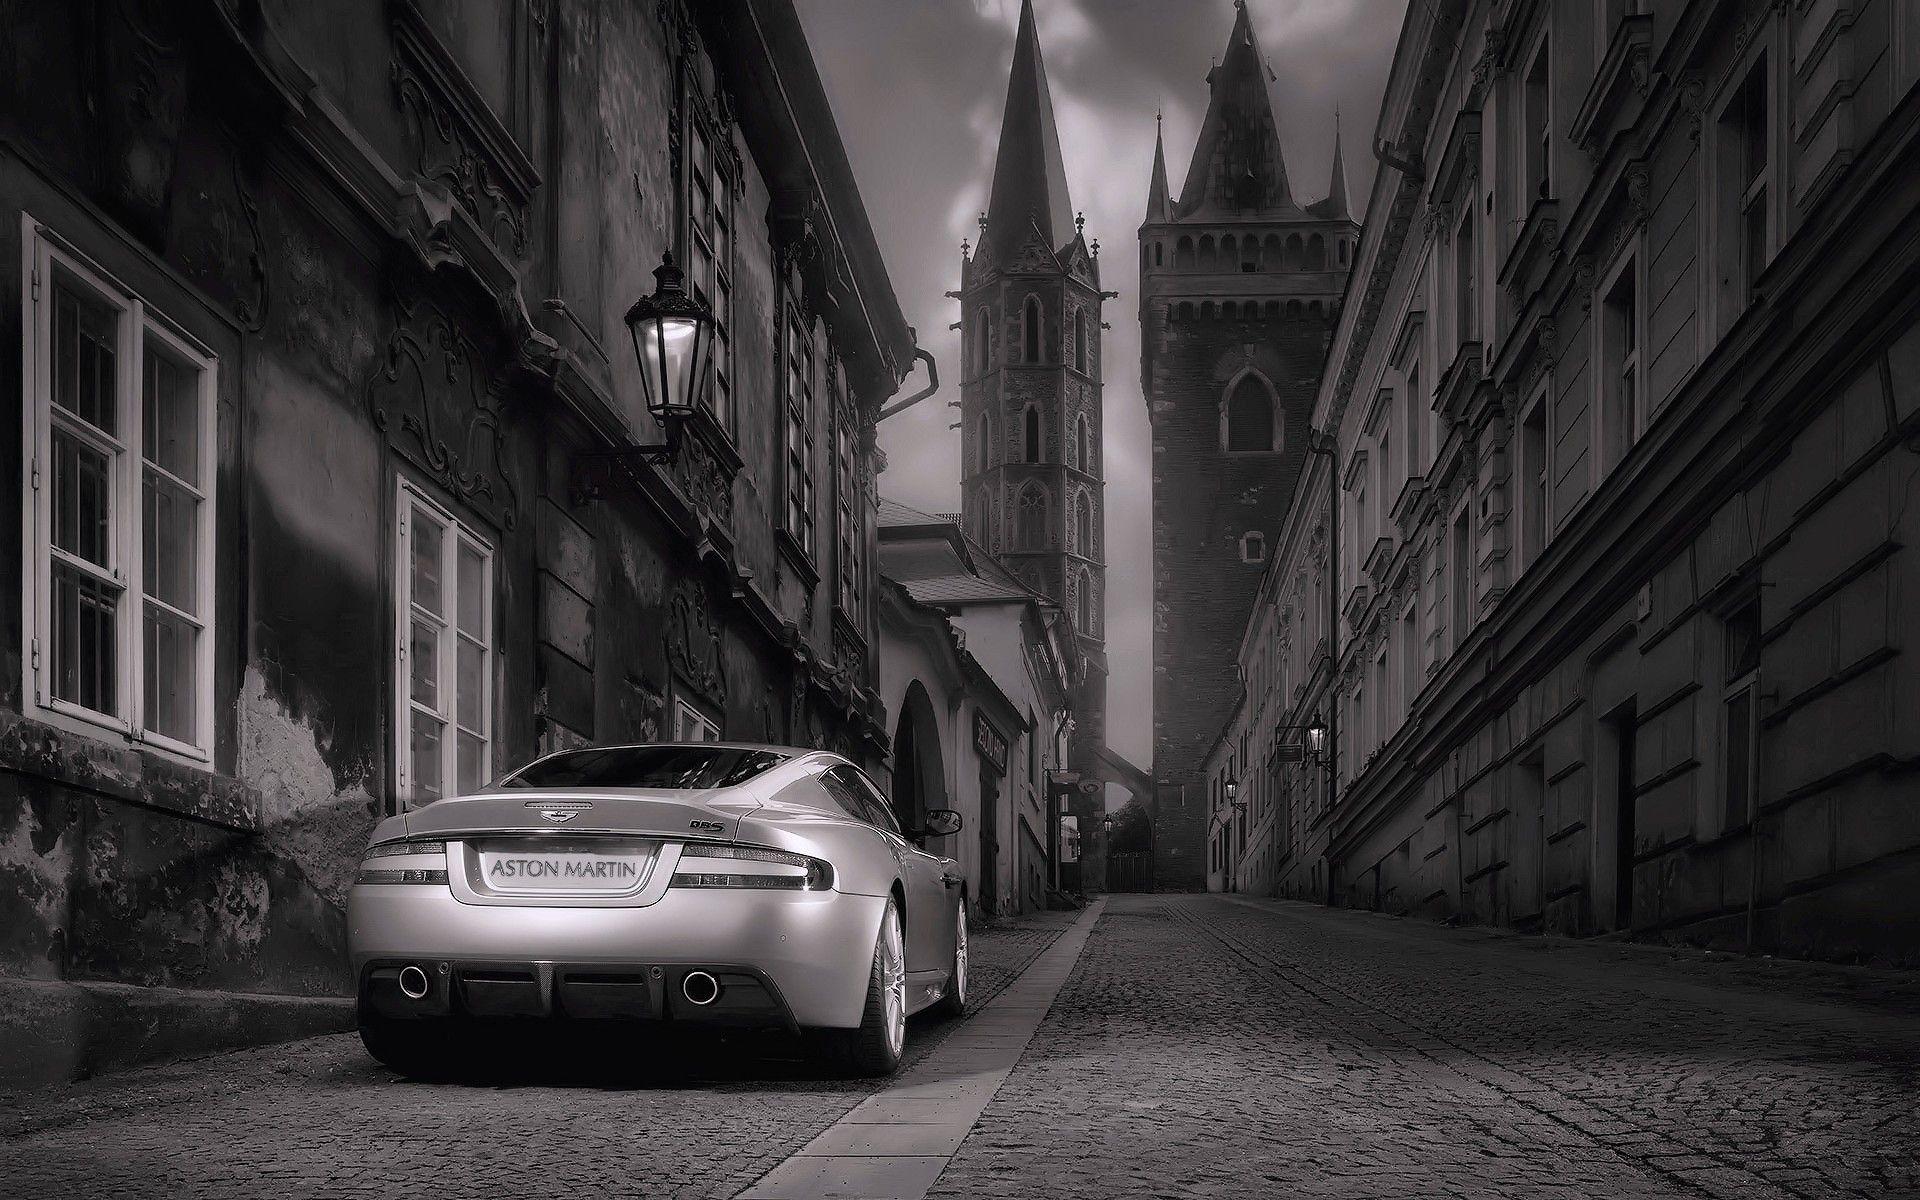 Gorgeous Aston Martin in a grey city Wallpaper download